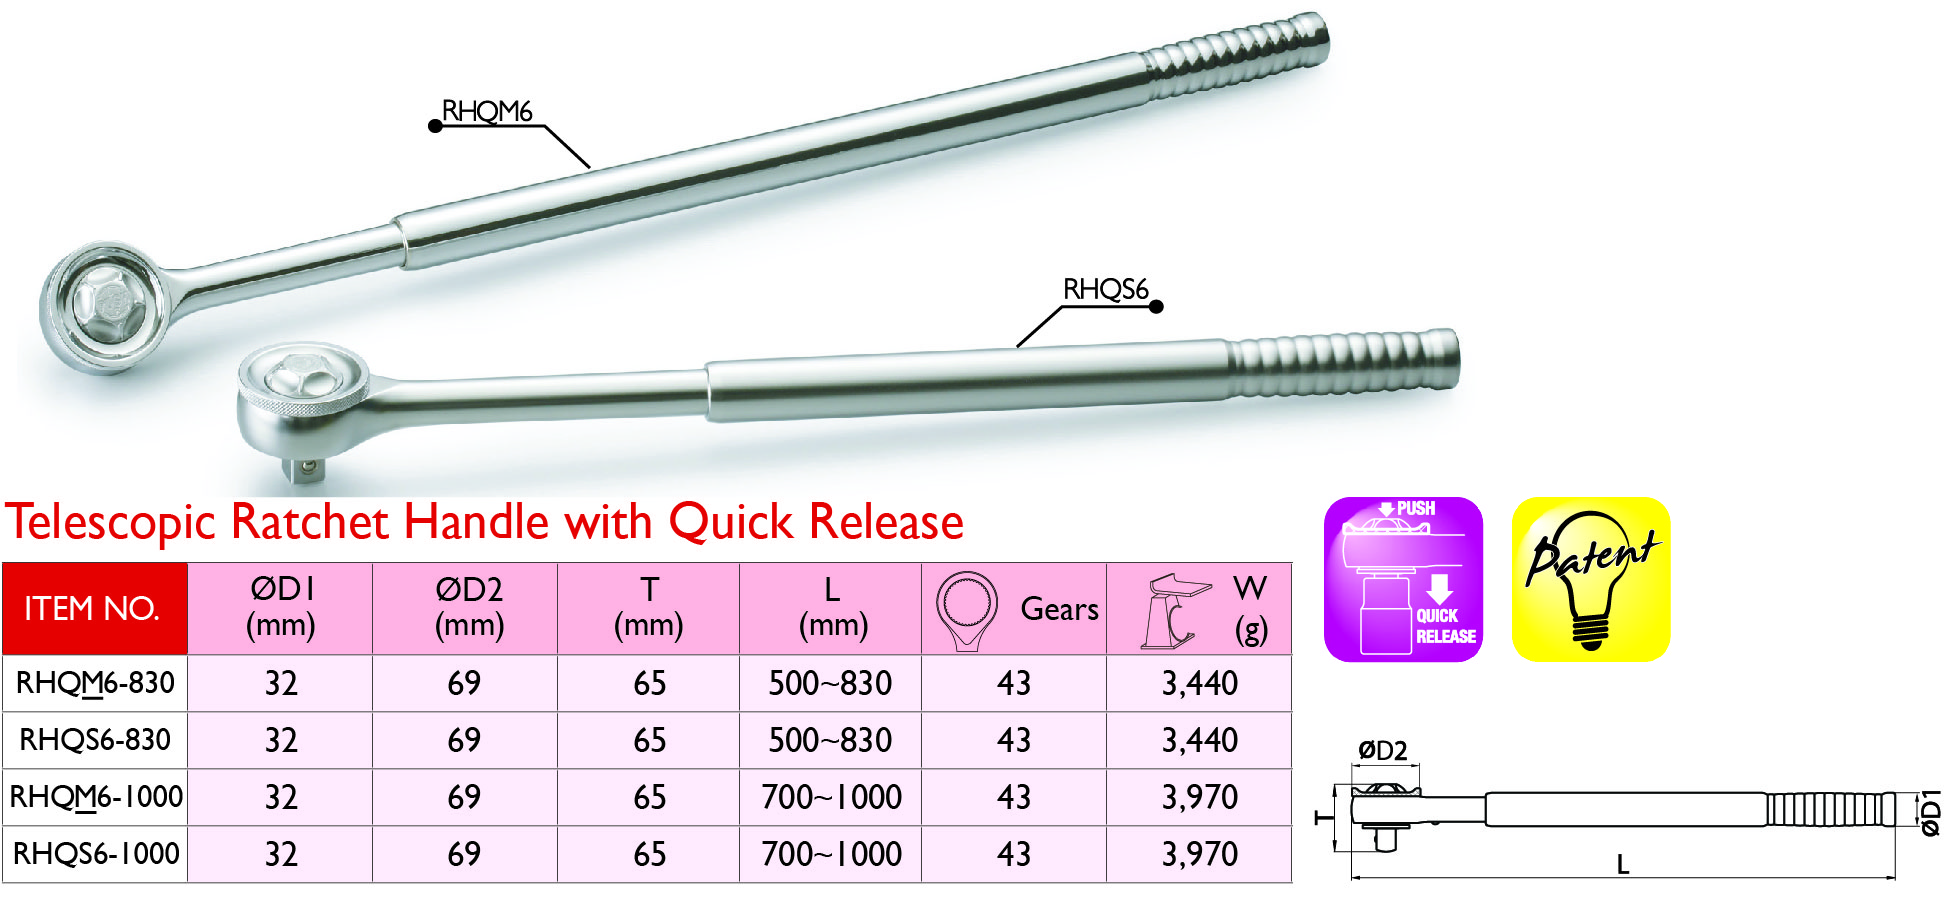 6_34 Telescopic Ratchet Handle with Quick Release_A.jpg